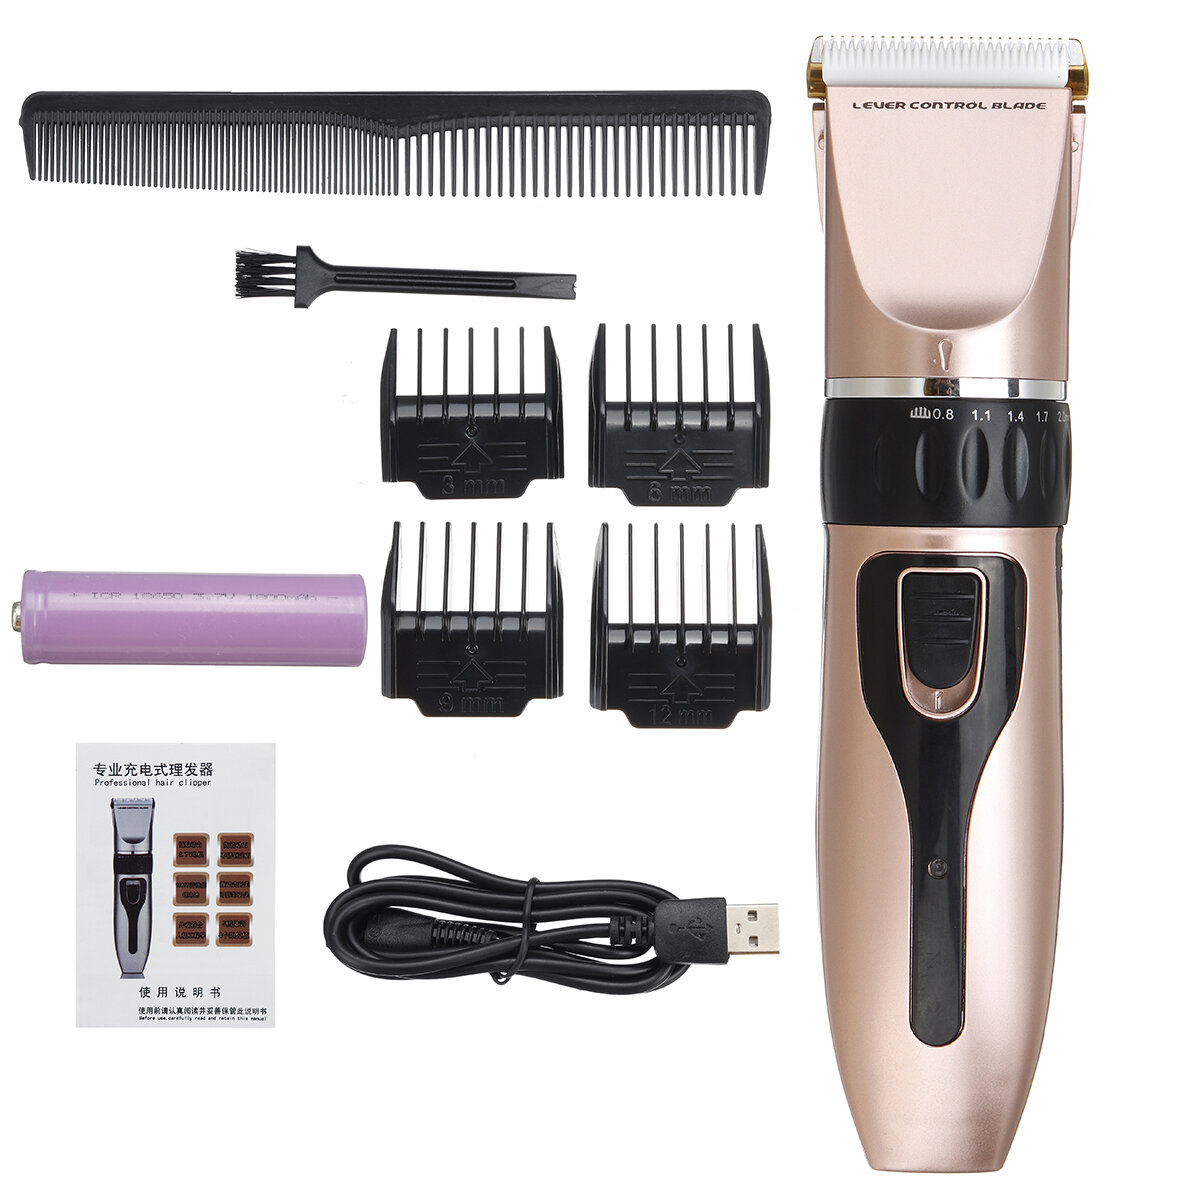 

20W Wireless Electric Shaver Professional Hair Clipper Trimmer Haircut Machine For Adults Children Pets W/ 4 Limit Combs